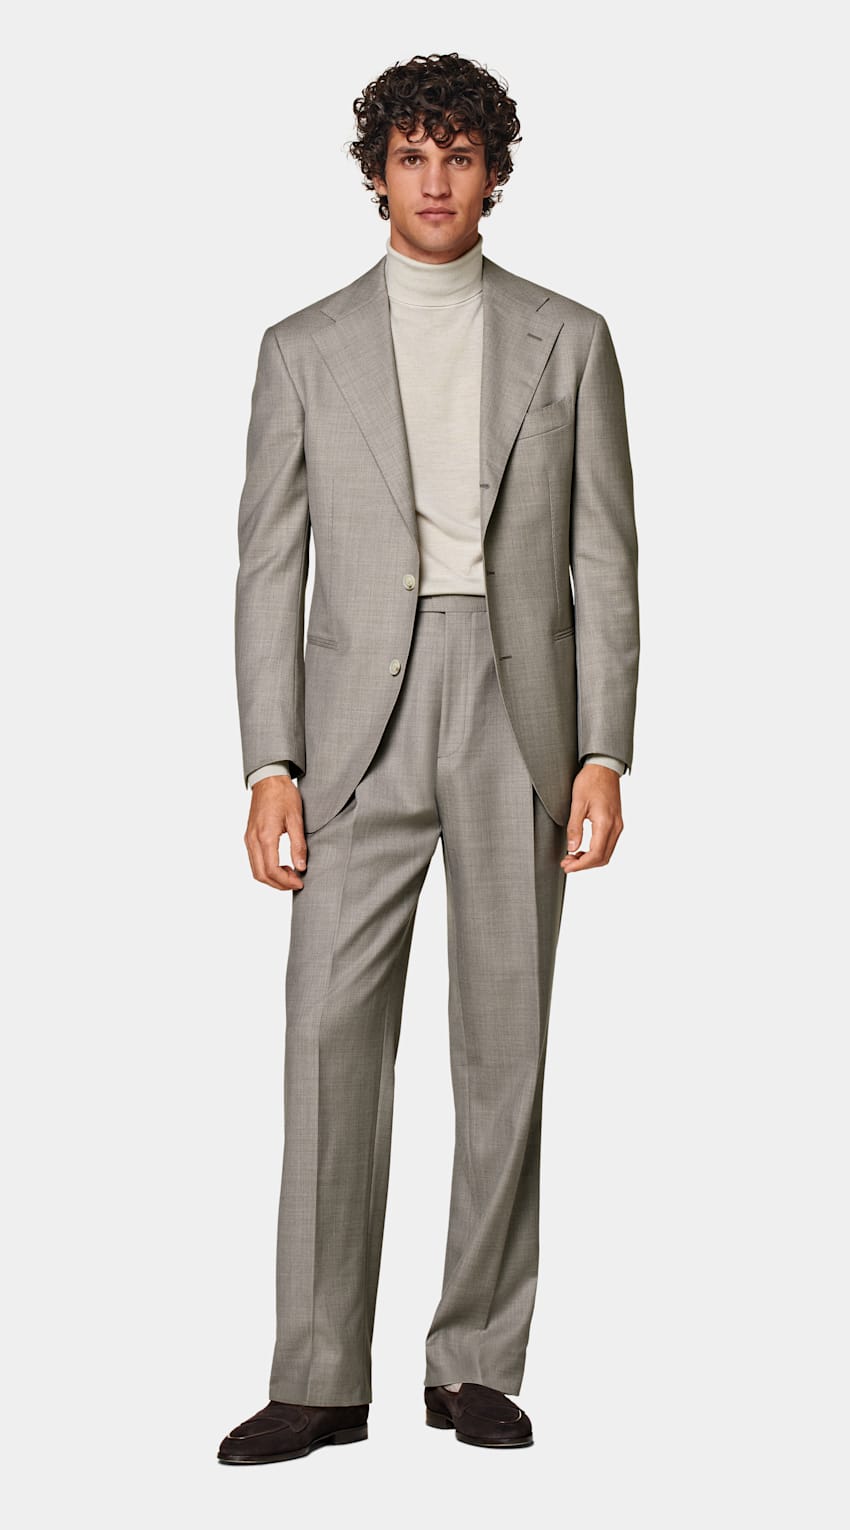 SUITSUPPLY Pure S110's Wool by Vitale Barberis Canonico, Italy Light Brown Roma Suit